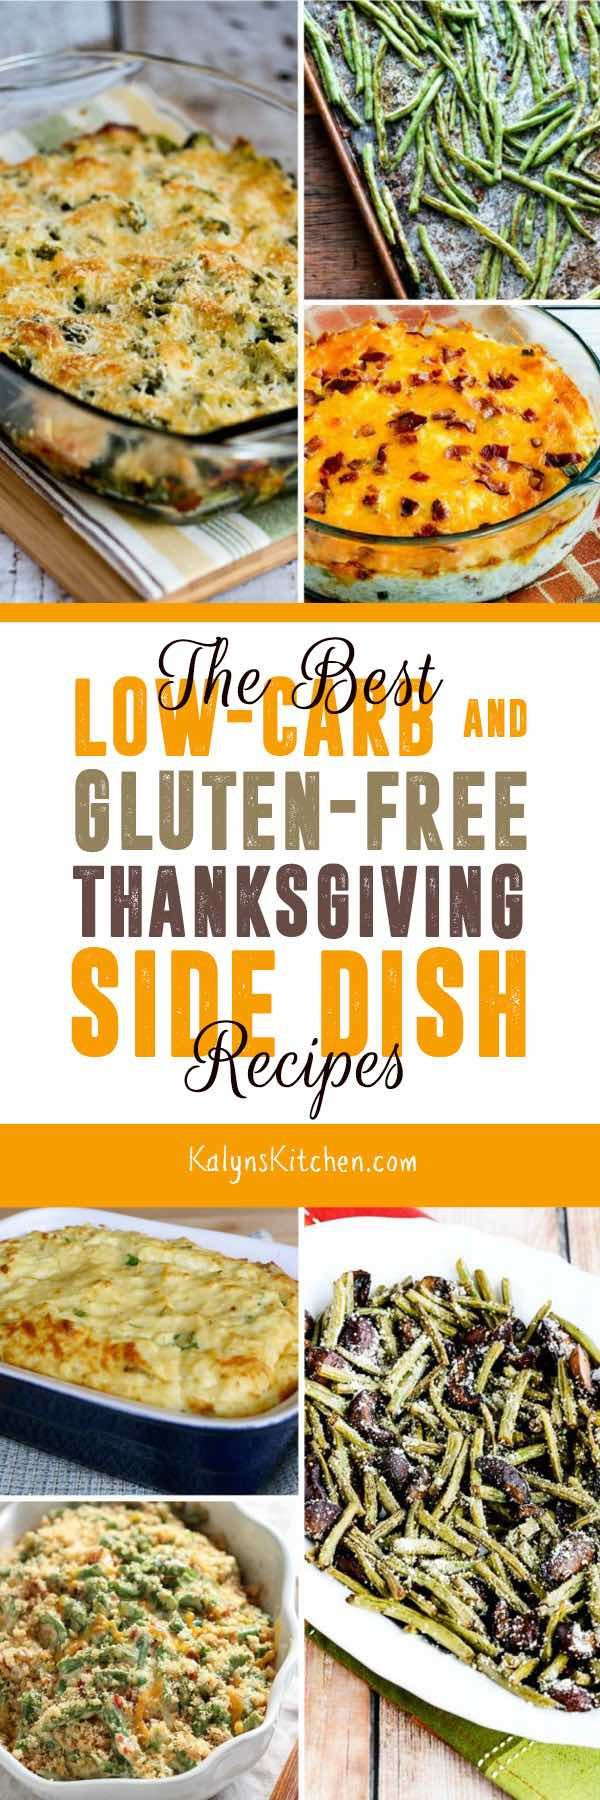 Low Carb Thanksgiving Side Dishes
 The BEST Low Carb and Gluten Free Thanksgiving Side Dish